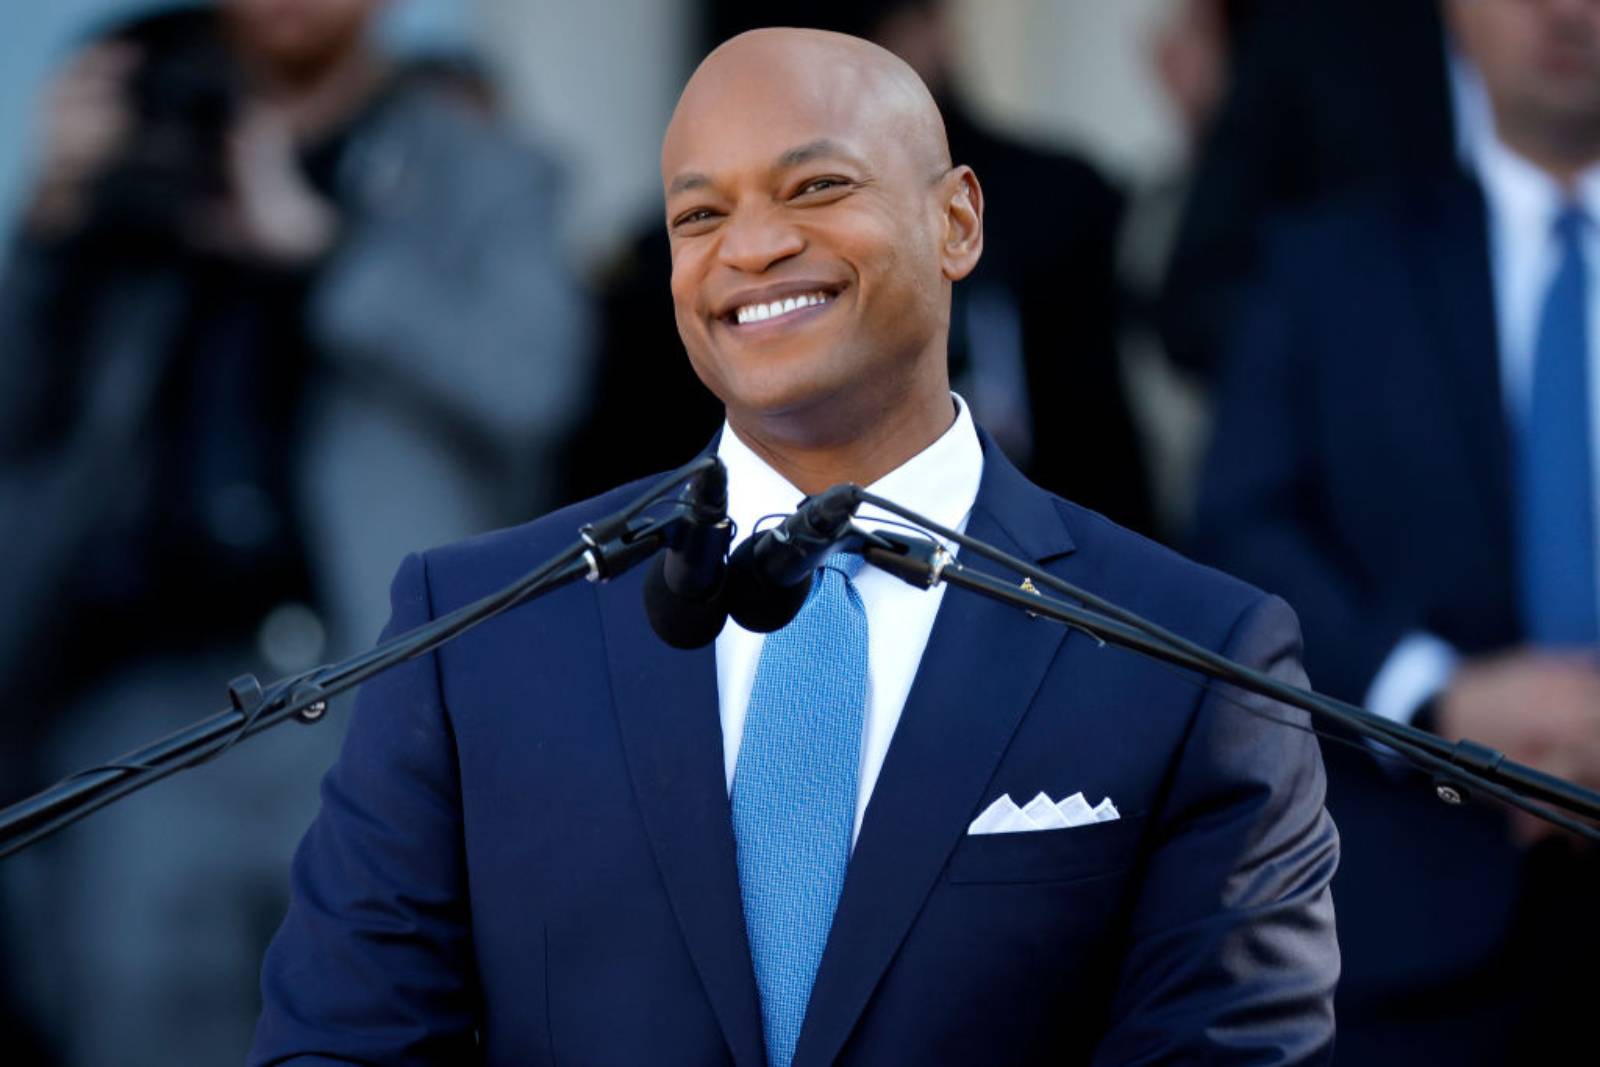 Maryland Governor Wes Moore delivers his inaugural address on the west side of the Maryland State House on January 18, 2023 in Annapolis, Maryland. Moore was sworn in on a bible that once belonged to former slave and abolitionist Frederick Douglass and held by Moore's wife, Dawn Moore. Democrat Moore defeated Republican nominee Dan Cox to become the first Black governor of Maryland and only the third Black person to be elected governor in the United States. (Photo by Chip Somodevilla/Getty Images)